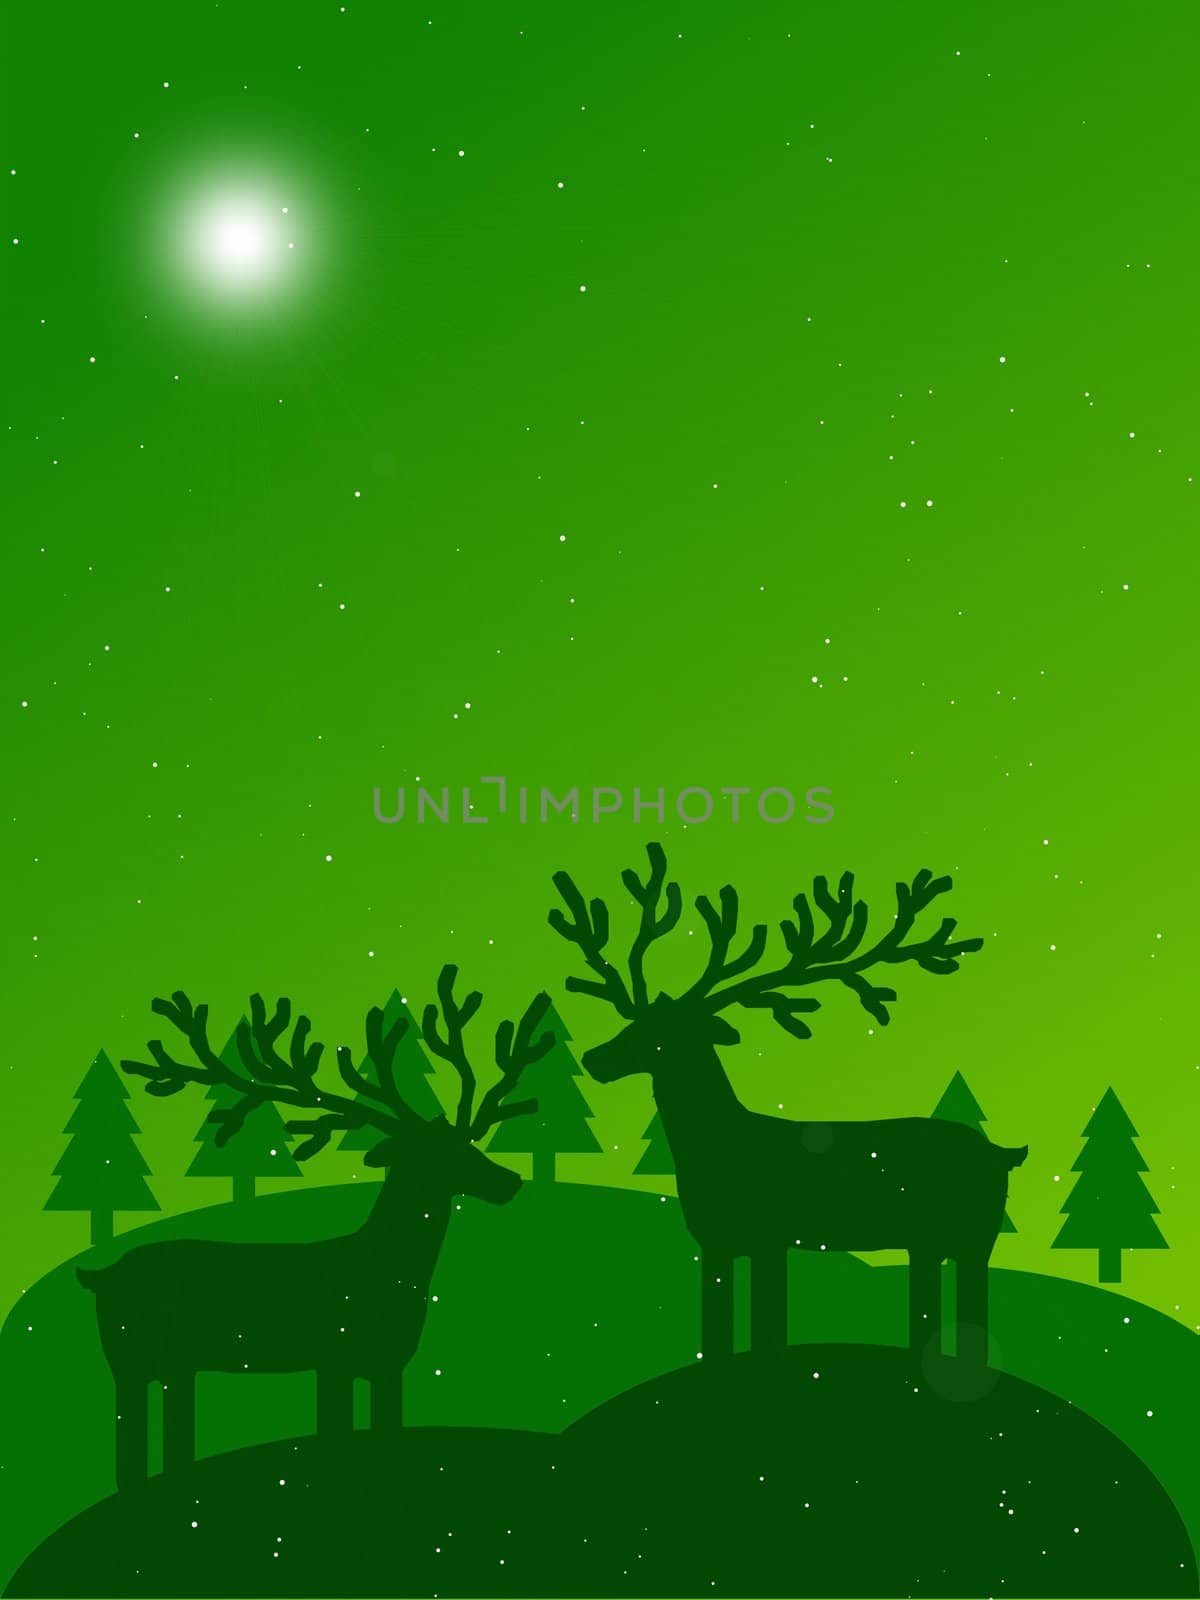 a green illustration of a christmas landscape with reindeers